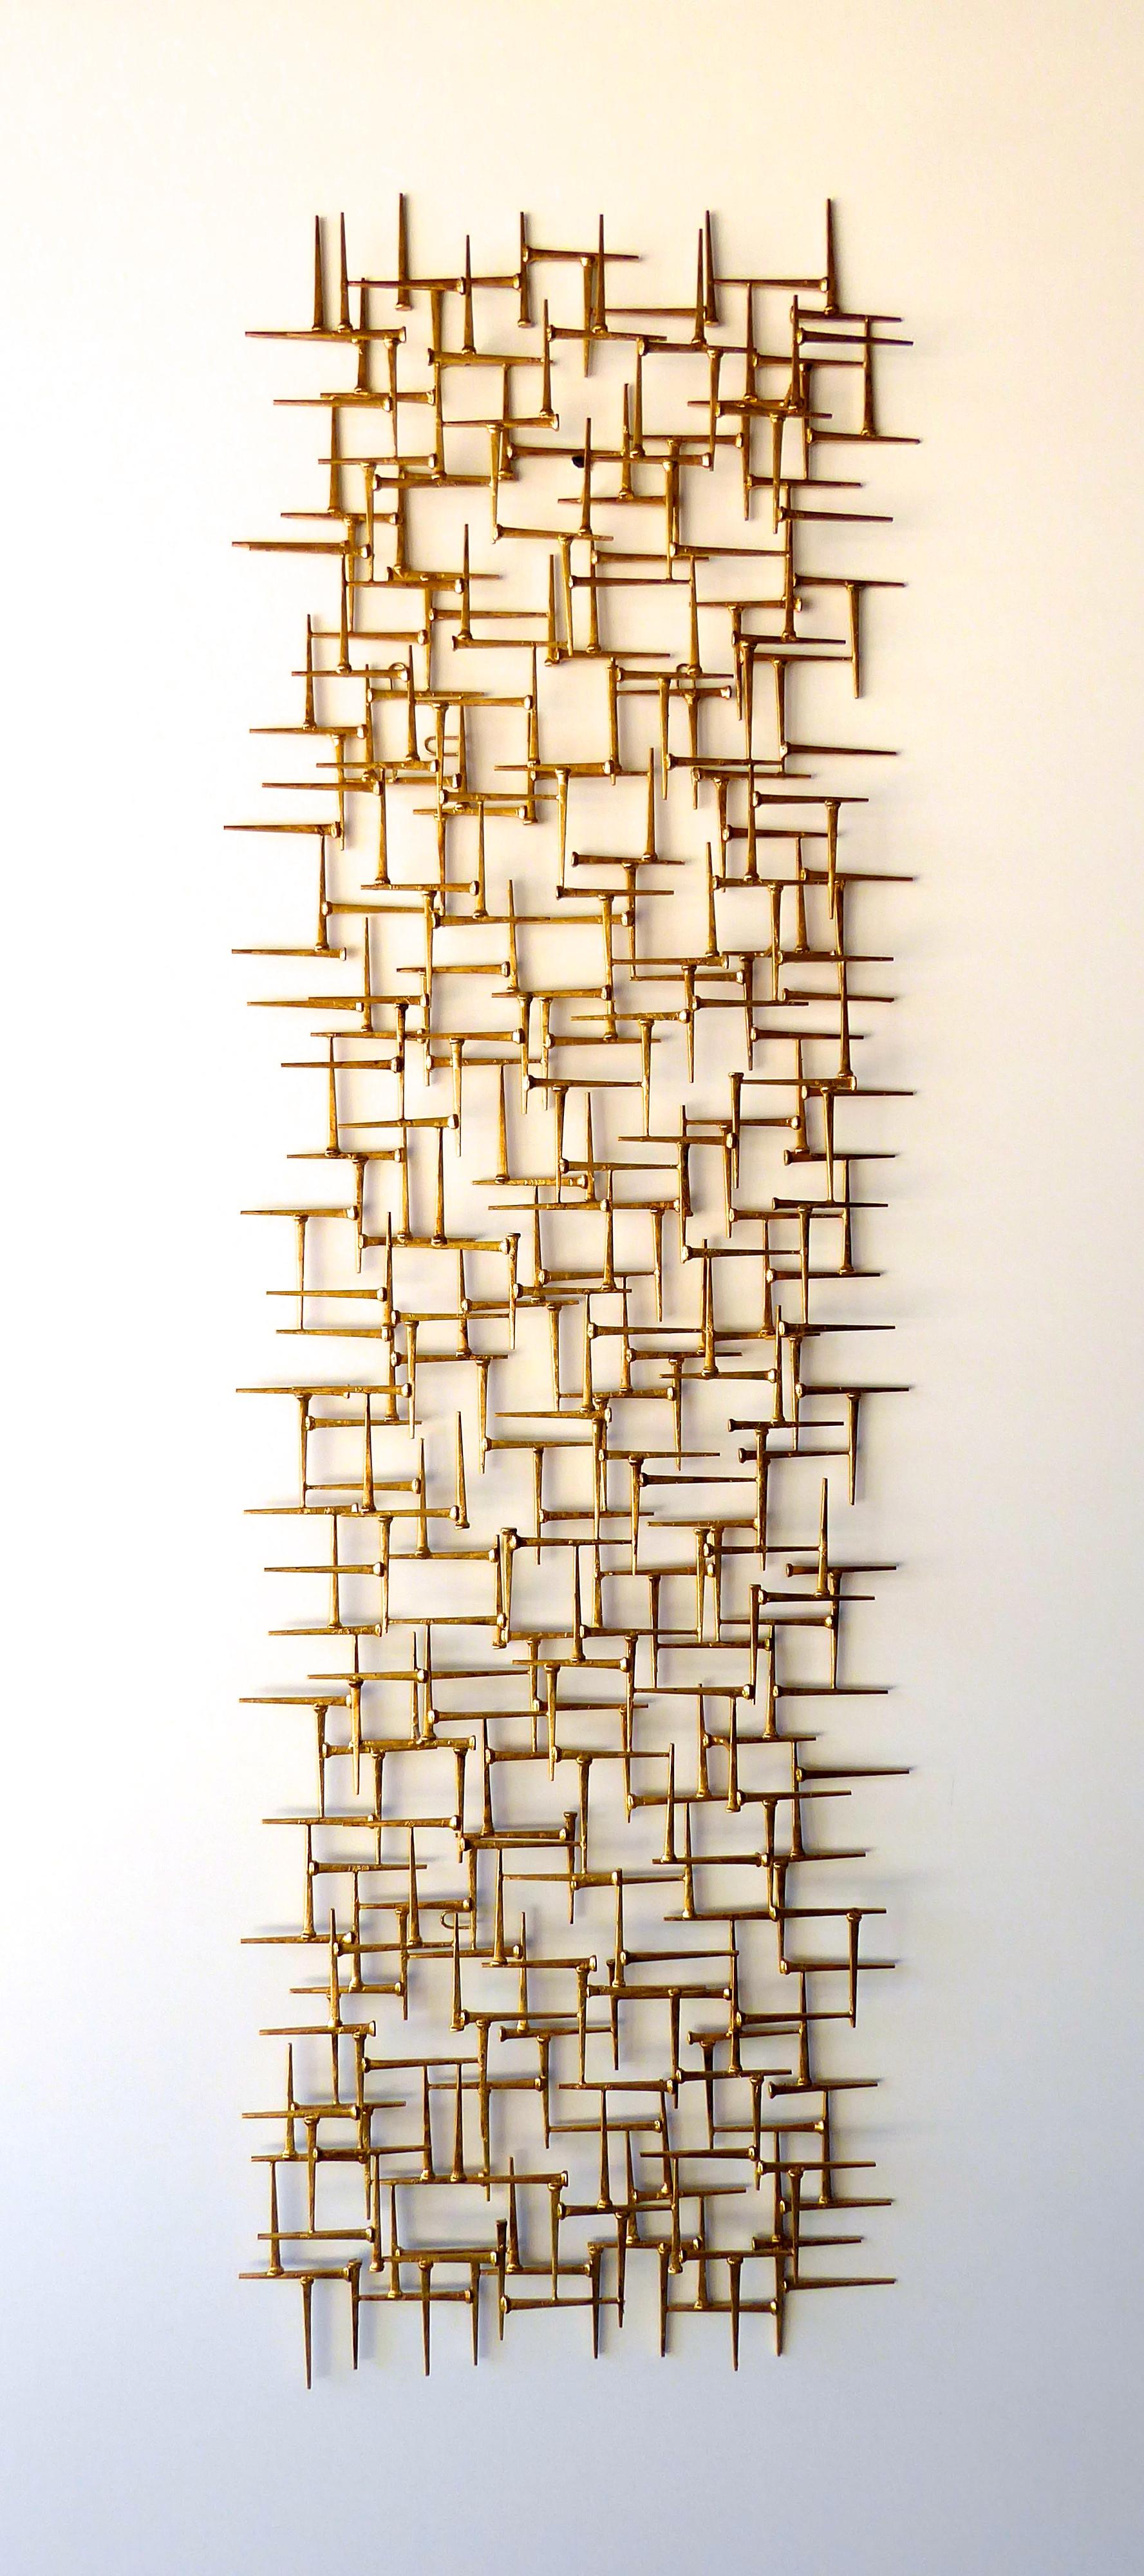 A large gold-leafed metal rectangular wall sculpture by contemporary American artist Del Williams. The sculpture is a modern take on midcentury but would work well in any type of interior. It can be hung either vertically or horizontally.